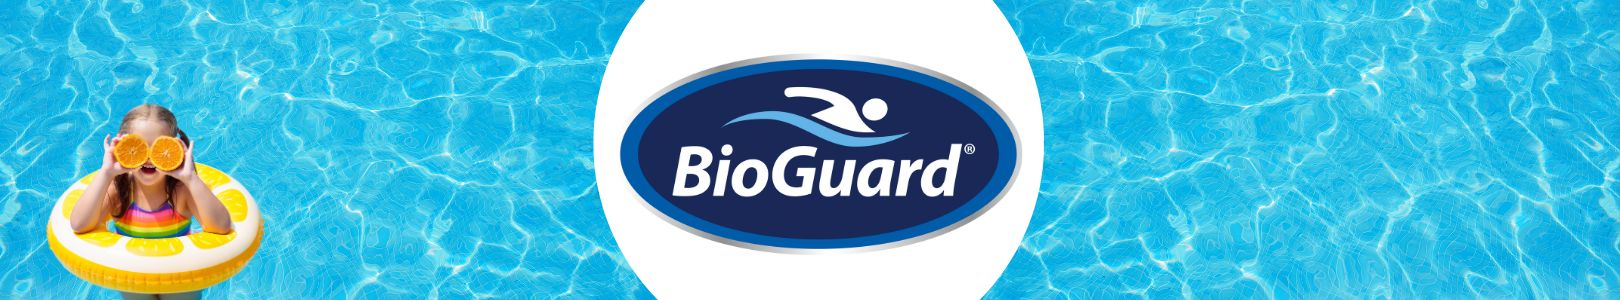 <p style="text-align: center;">BioGuard has an extensive range of pool and spa chemicals for all salt and fresh water requirements.</p>
<p style="text-align: center;">Whether you are experienced or new to the world of pool and spas, Irribiz can help you maintain your water to be clear, sparkling and healthy.</p>
<p style="text-align: center;">For more information call 1800 191 138 or email&nbsp;<a href="mailto:online@irribiz.com.au">online@irribiz.com.au</a>. &nbsp;</p>